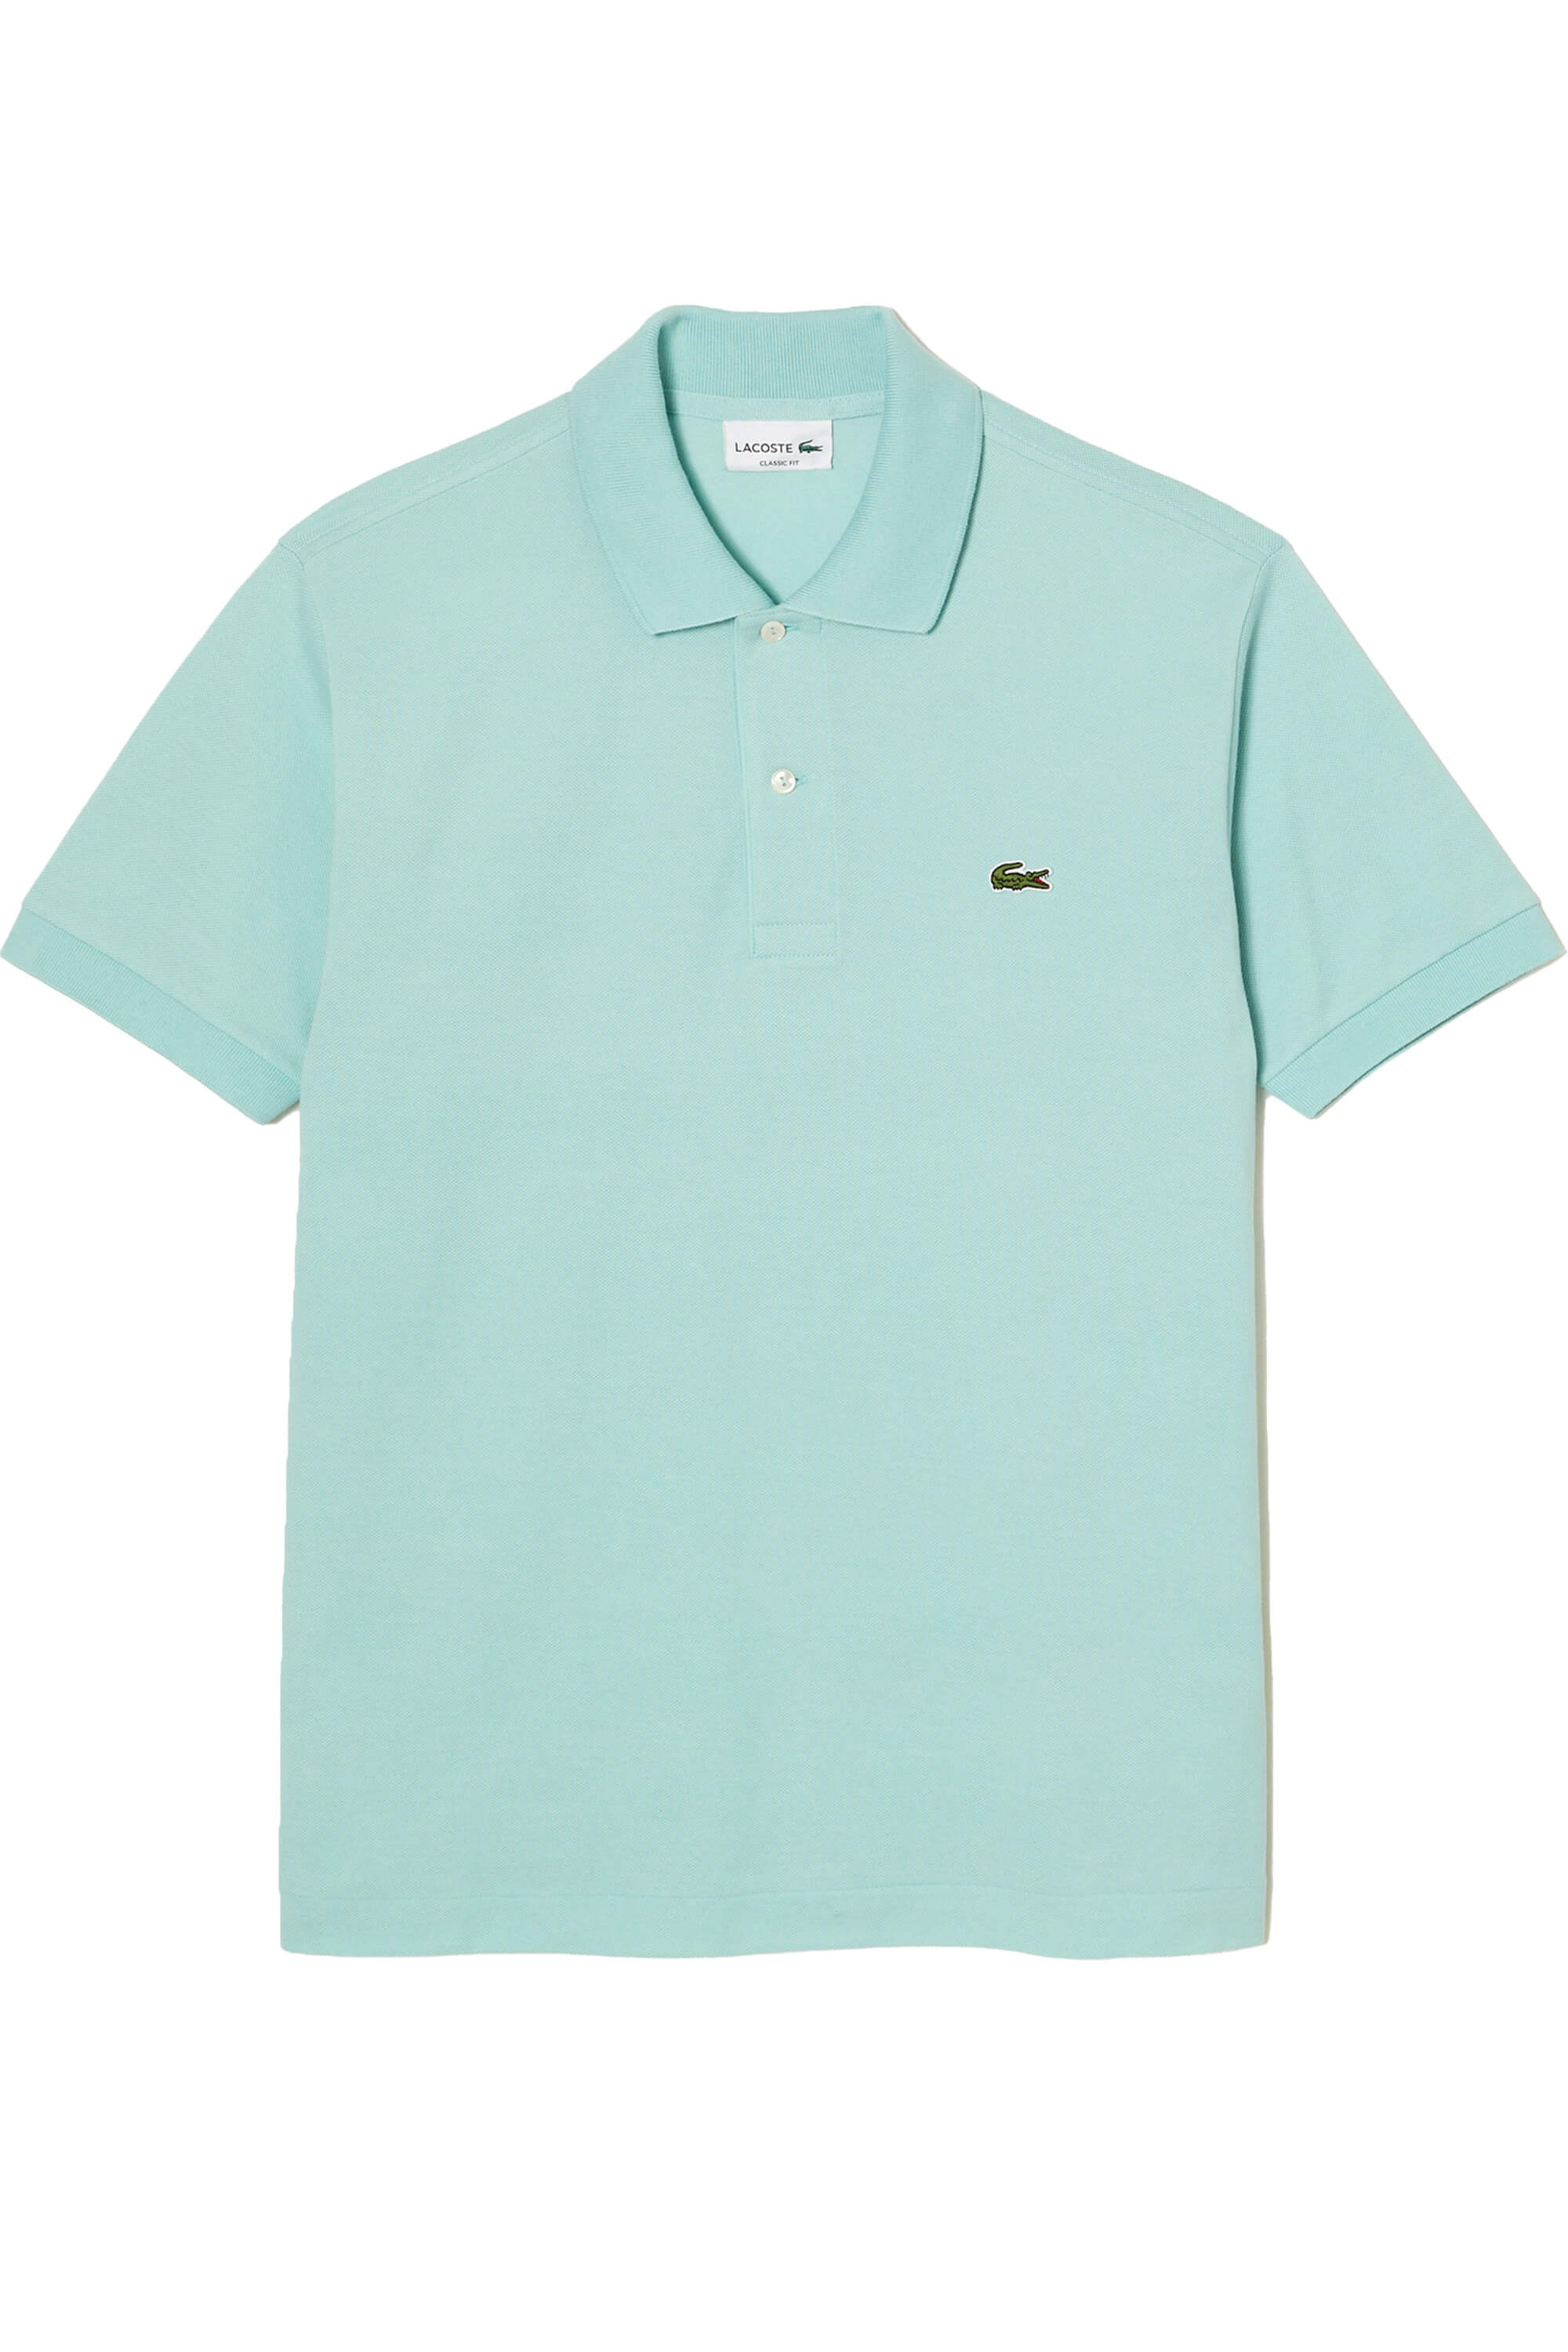 Lacoste Classic Fit Polo Light Green